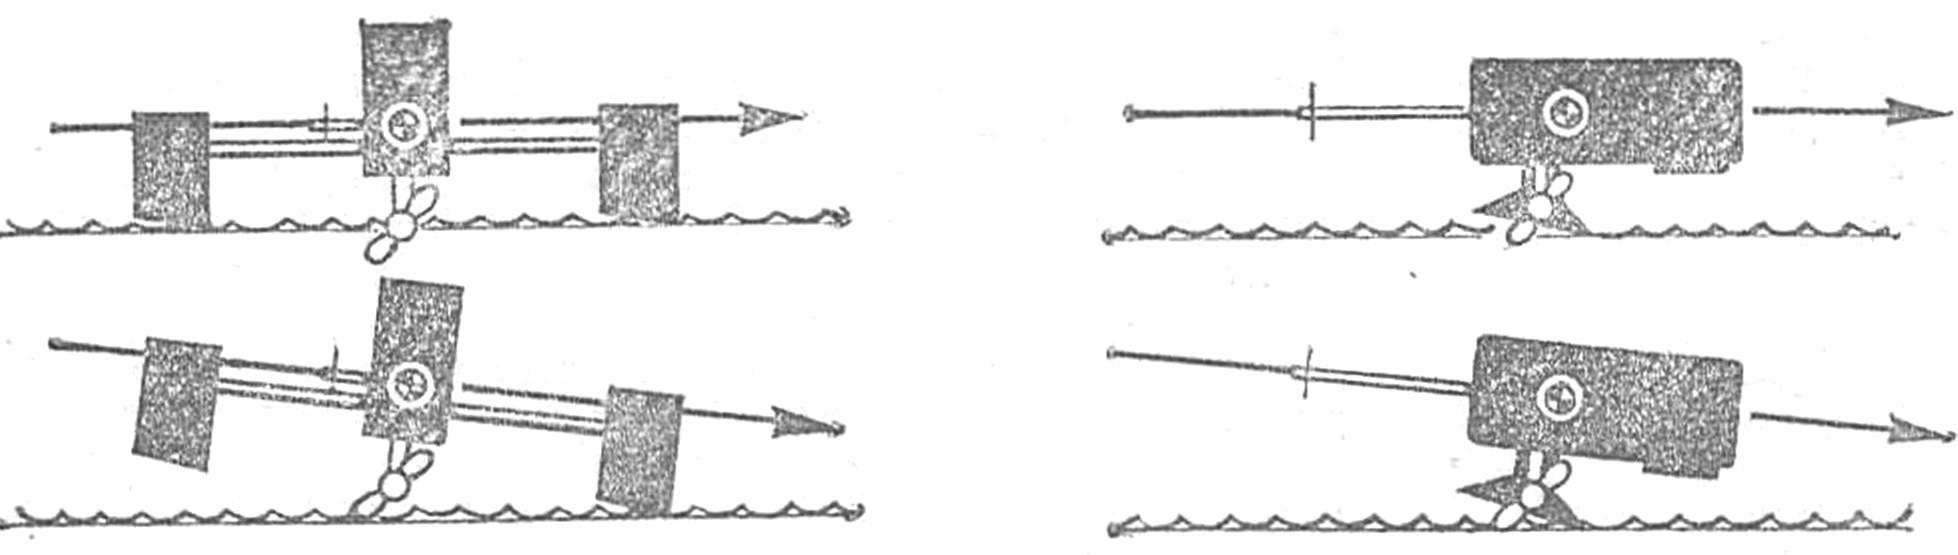 Fig. 2. Correct (top) and incorrect (bottom) position of the glider during the race at different heights of the Central tower. The right shows the model of the new scheme, the left — traditional.